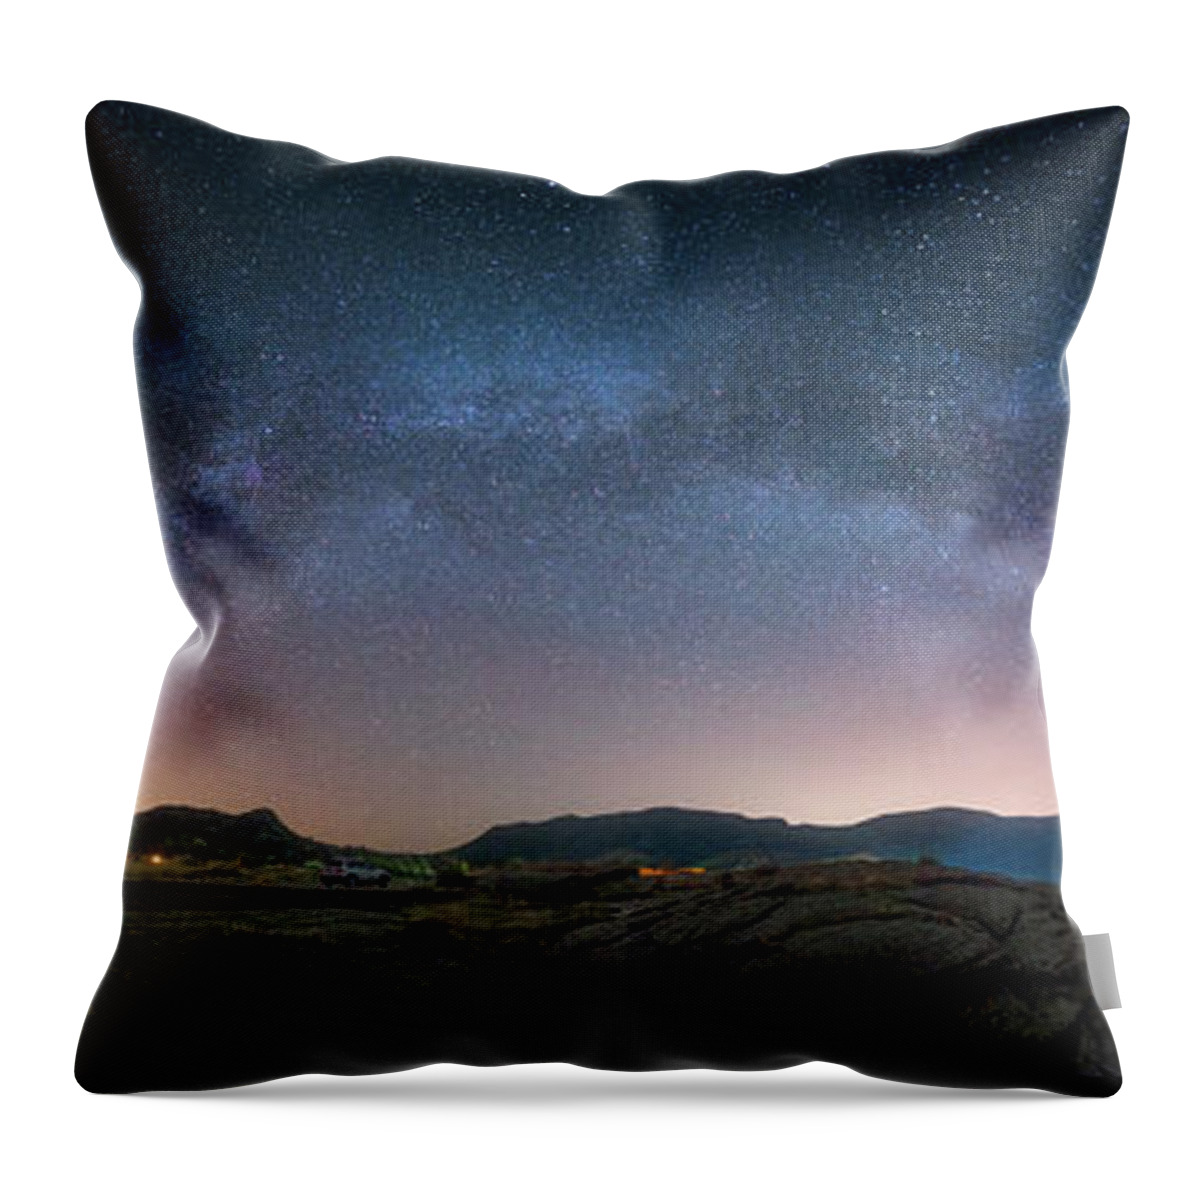 Milky Way Throw Pillow featuring the photograph Late Night Milky Show by Darren White